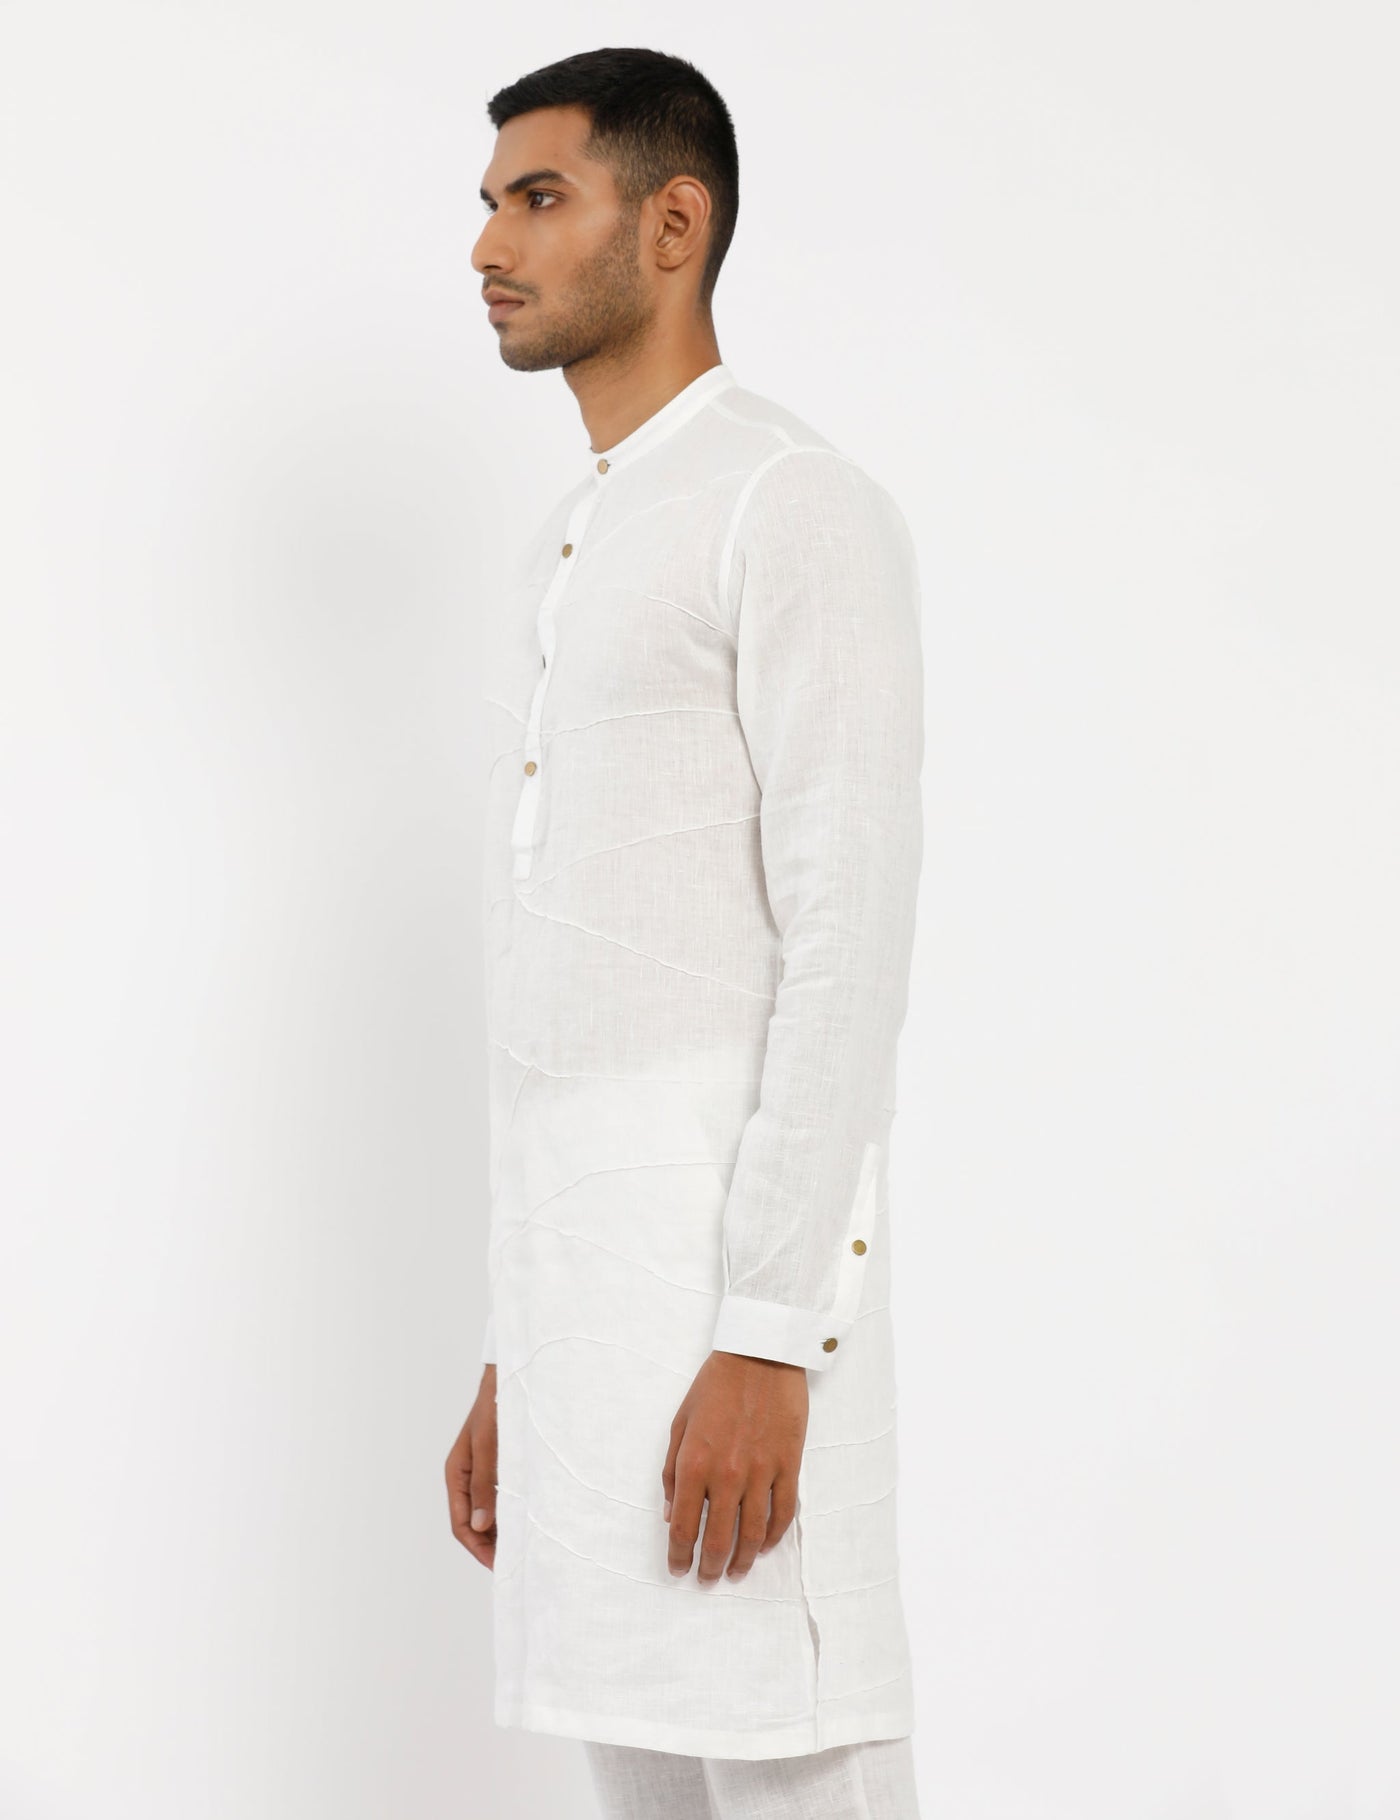 White Desert Kurta Indian Clothing in Denver, CO, Aurora, CO, Boulder, CO, Fort Collins, CO, Colorado Springs, CO, Parker, CO, Highlands Ranch, CO, Cherry Creek, CO, Centennial, CO, and Longmont, CO. NATIONWIDE SHIPPING USA- India Fashion X